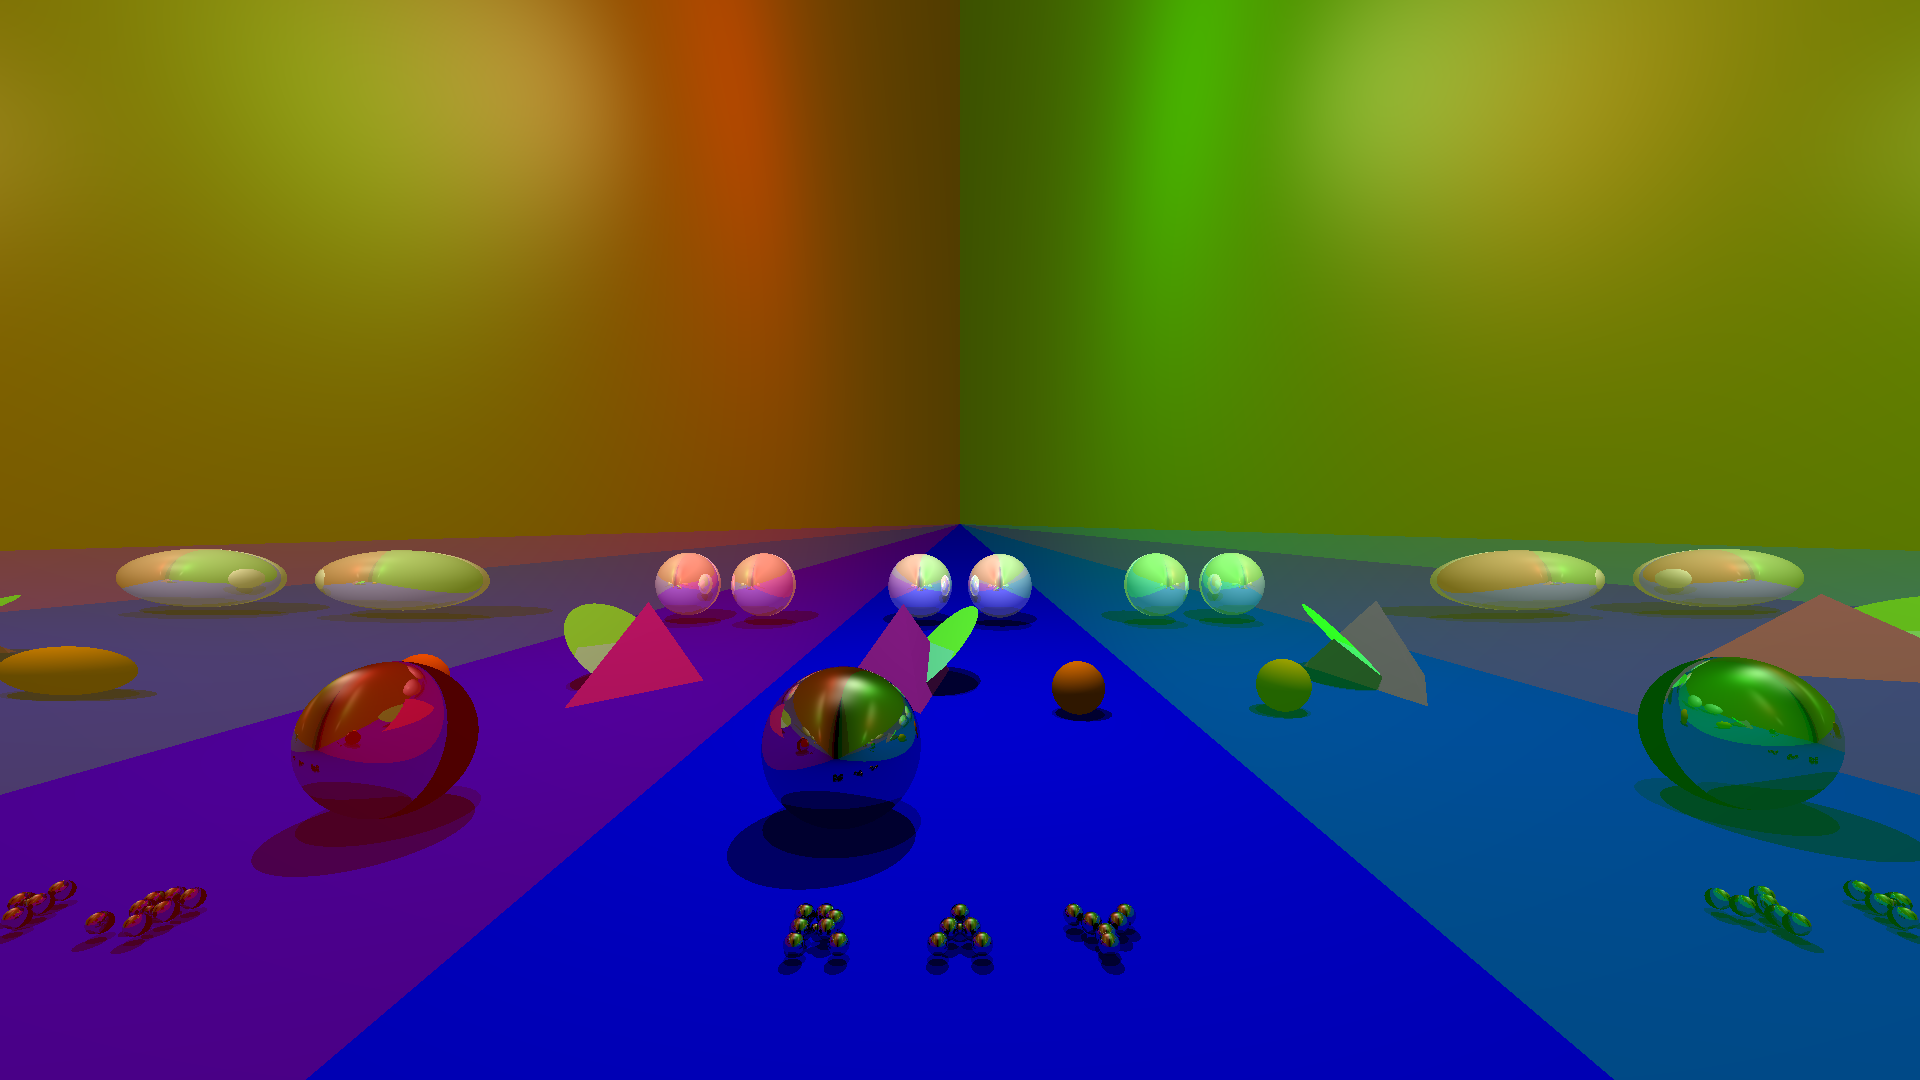 Ray tracer image